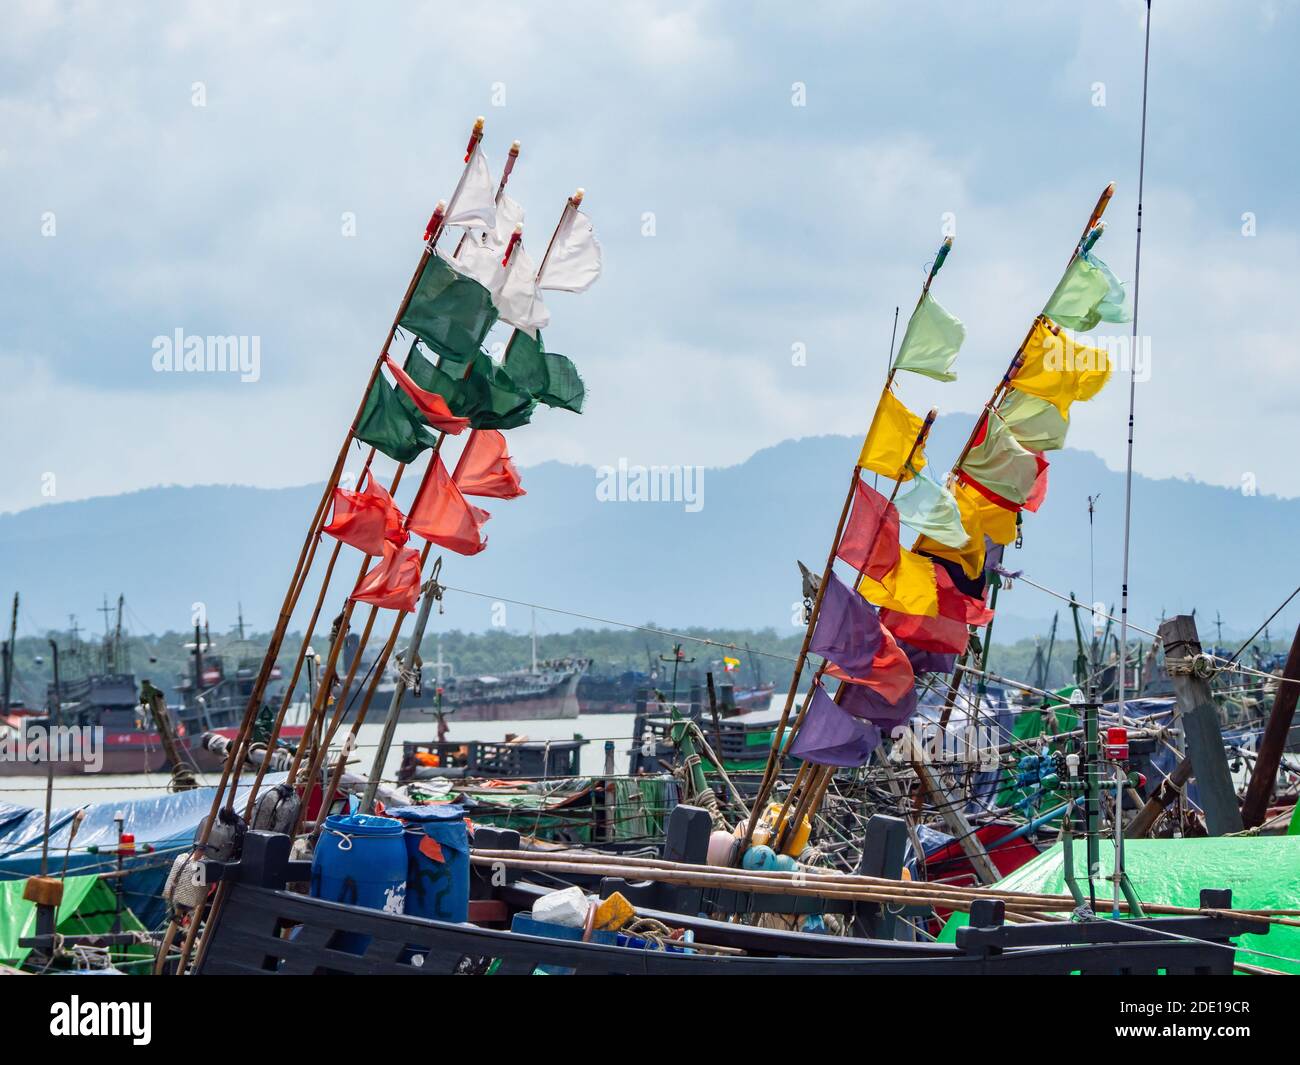 Flags on marker buoys for fishing gear at a quay in Myeik, Tanintharyi Region, Myanmar Stock Photo